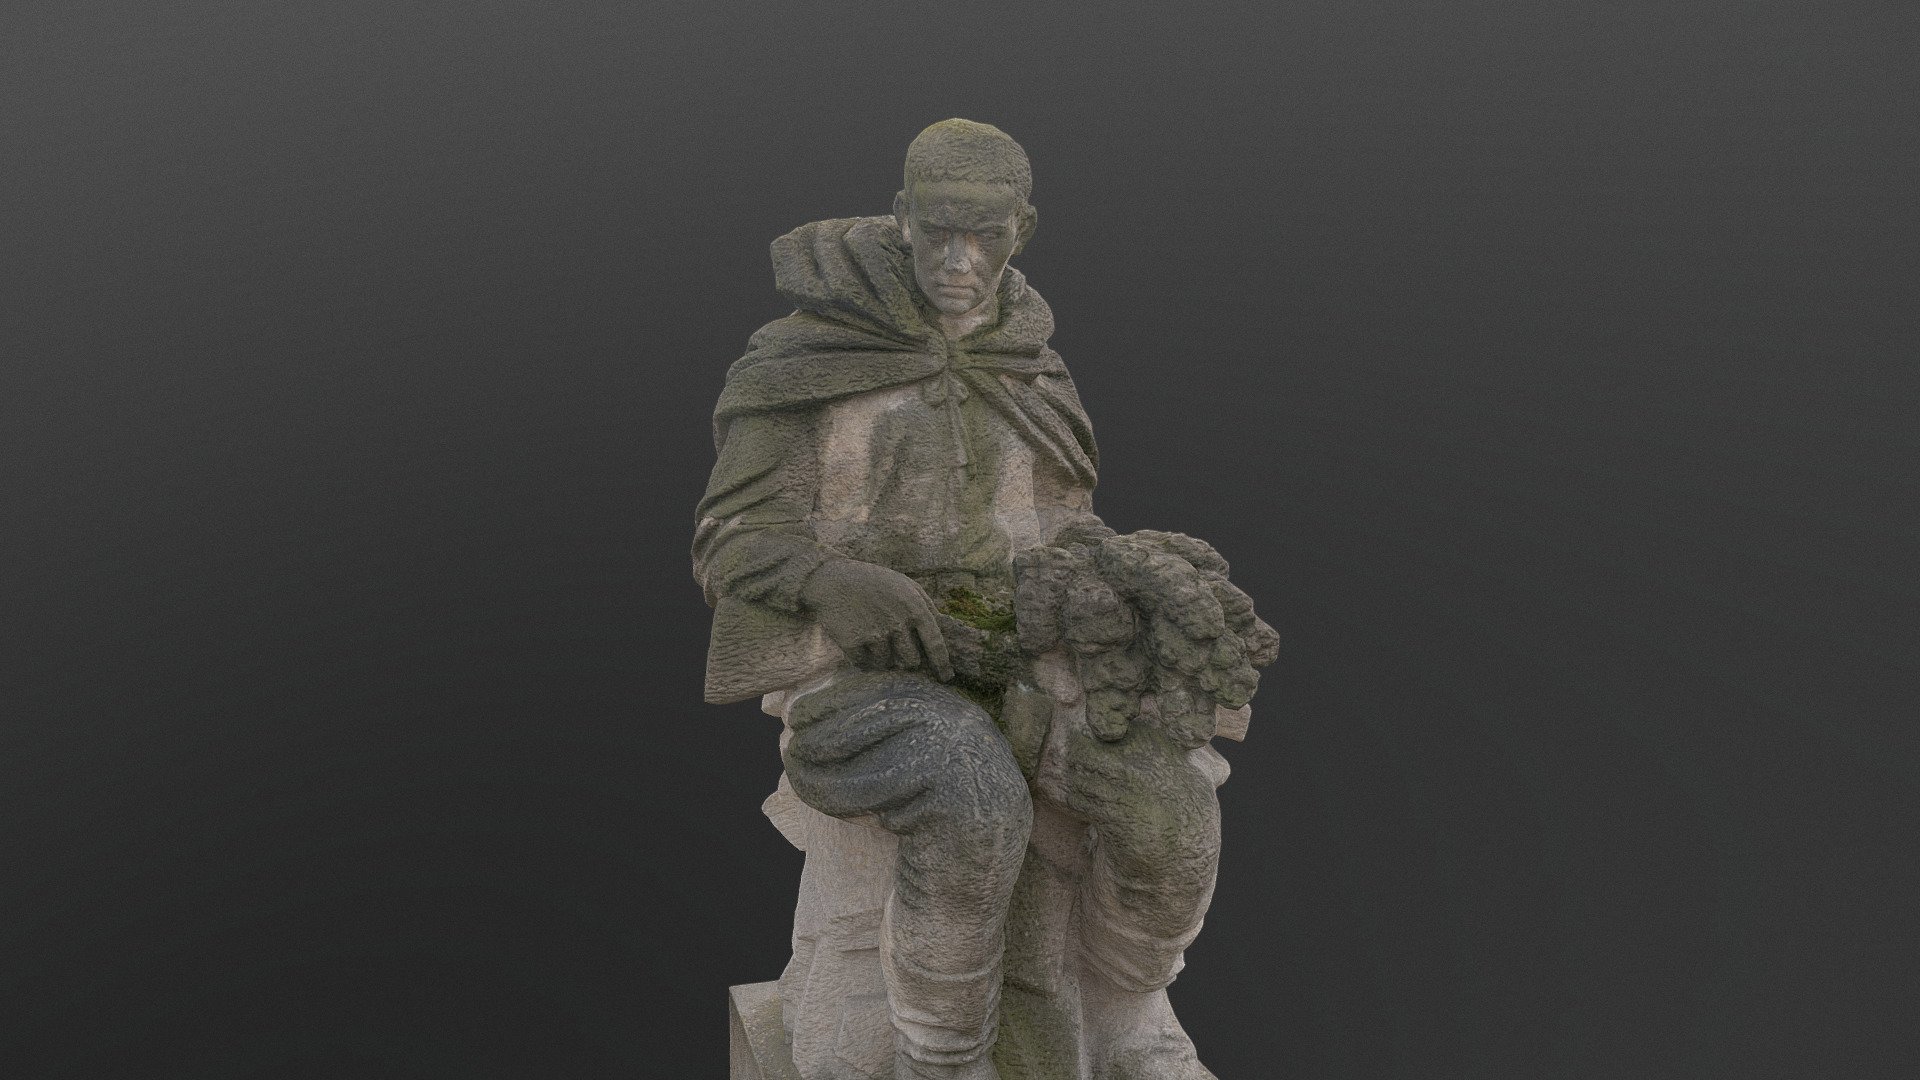 Red army soldier statue seated sitting with flowers and gun rifle in his hands, 1950s - 1970s public square art statue sculpture figure

Photogrammetry scan 120x36MP, 2x8K texture + HD Normals - Red army soldier statue - Buy Royalty Free 3D model by matousekfoto 3d model